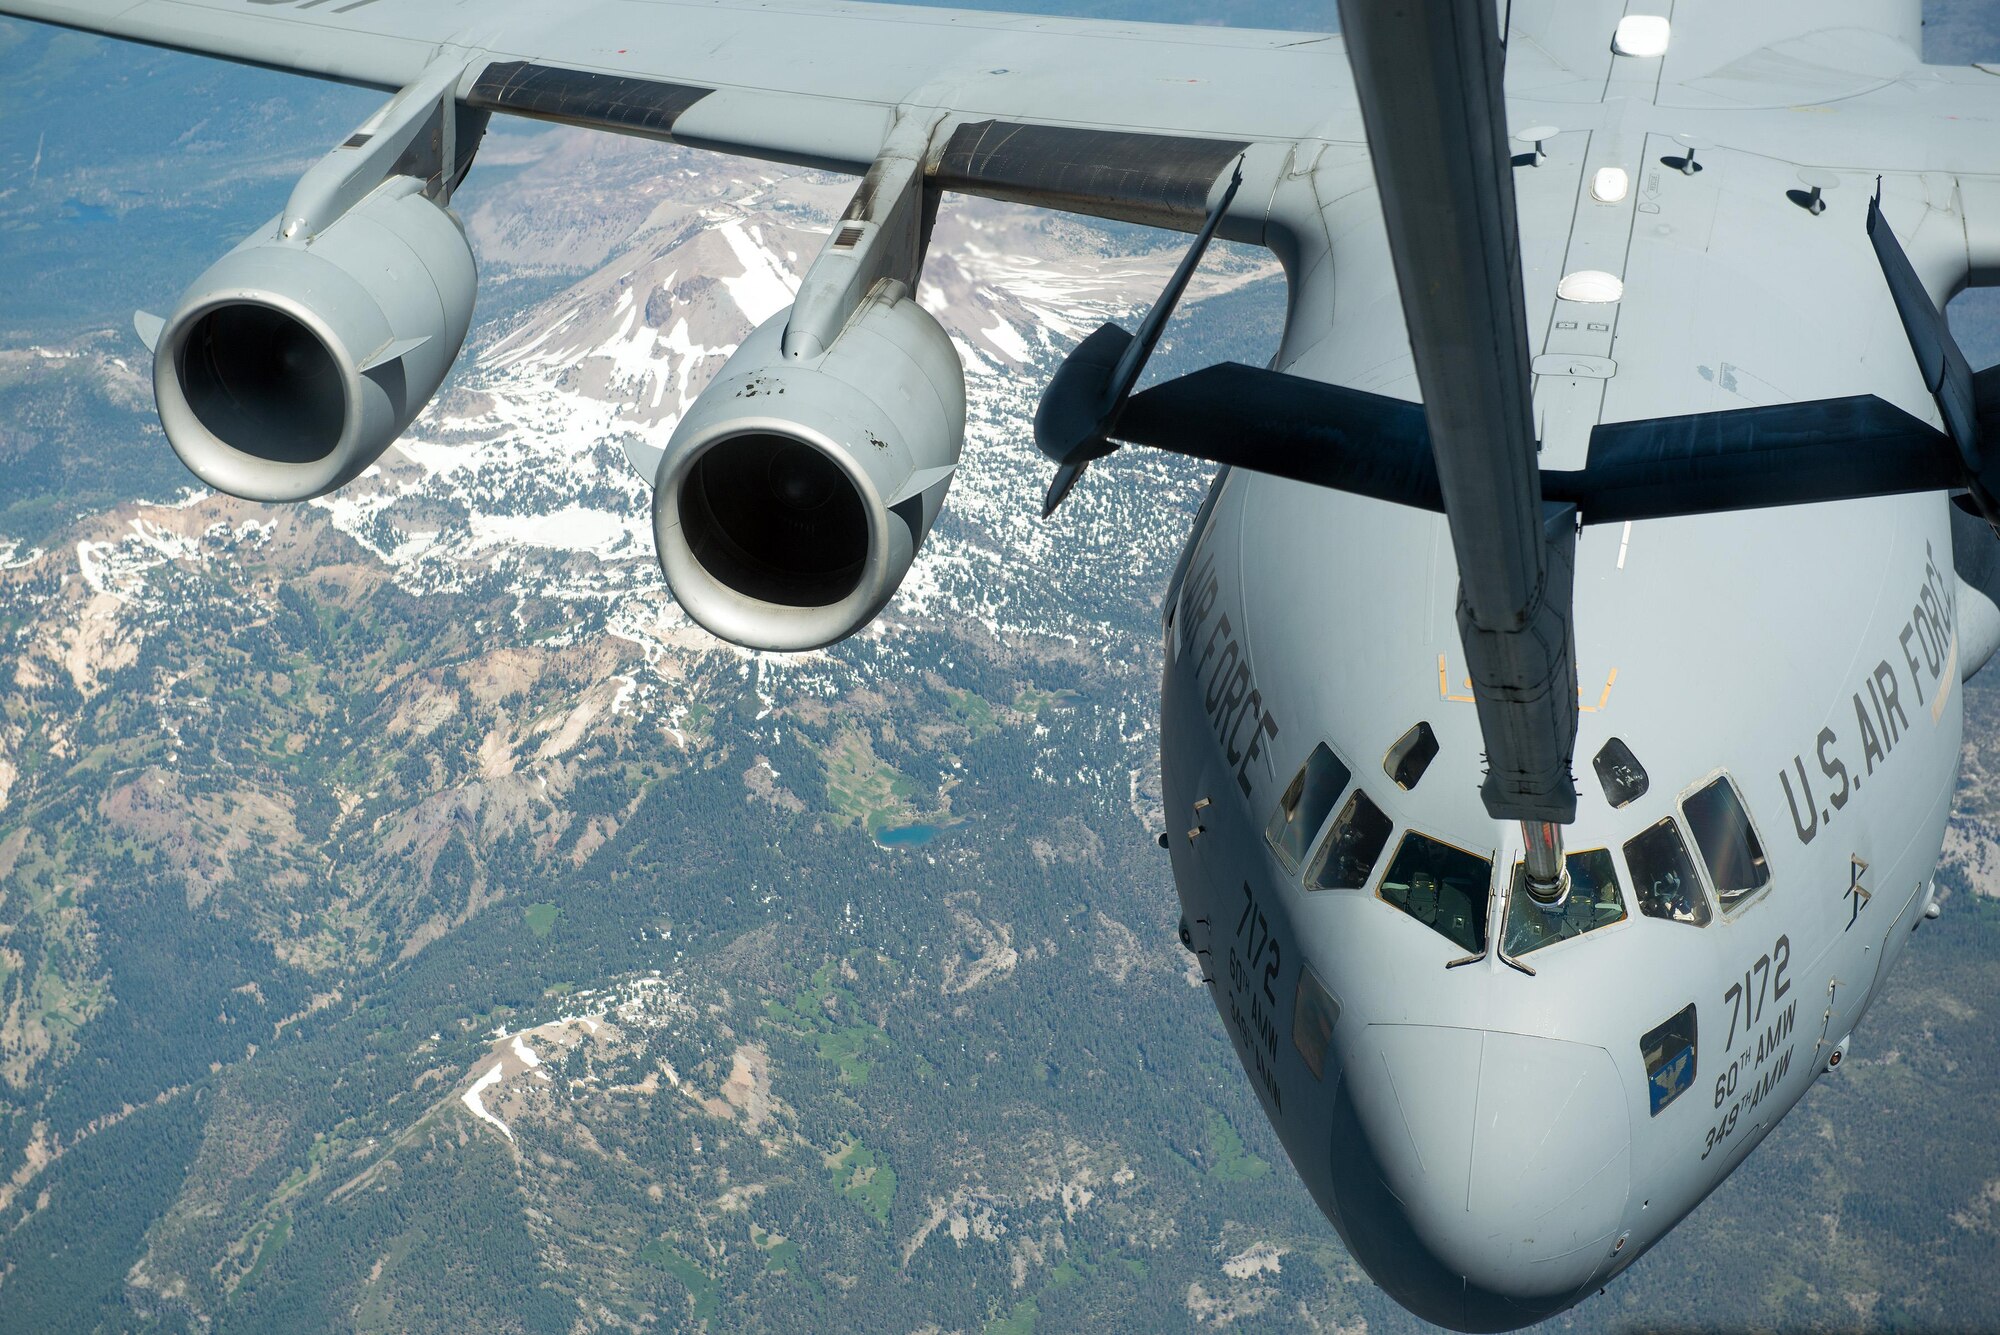 A C-17 Globemaster III from the 301st Airlift Squadron, 349th Air Mobility Wing, Travis Air Force Base, Calif., is refueled by a KC-10 Extender, July 20, 2017. The C-17 Globemaster III was conducting a local training mission in Northern California. (U.S. Air Force photo Louis Briscese)